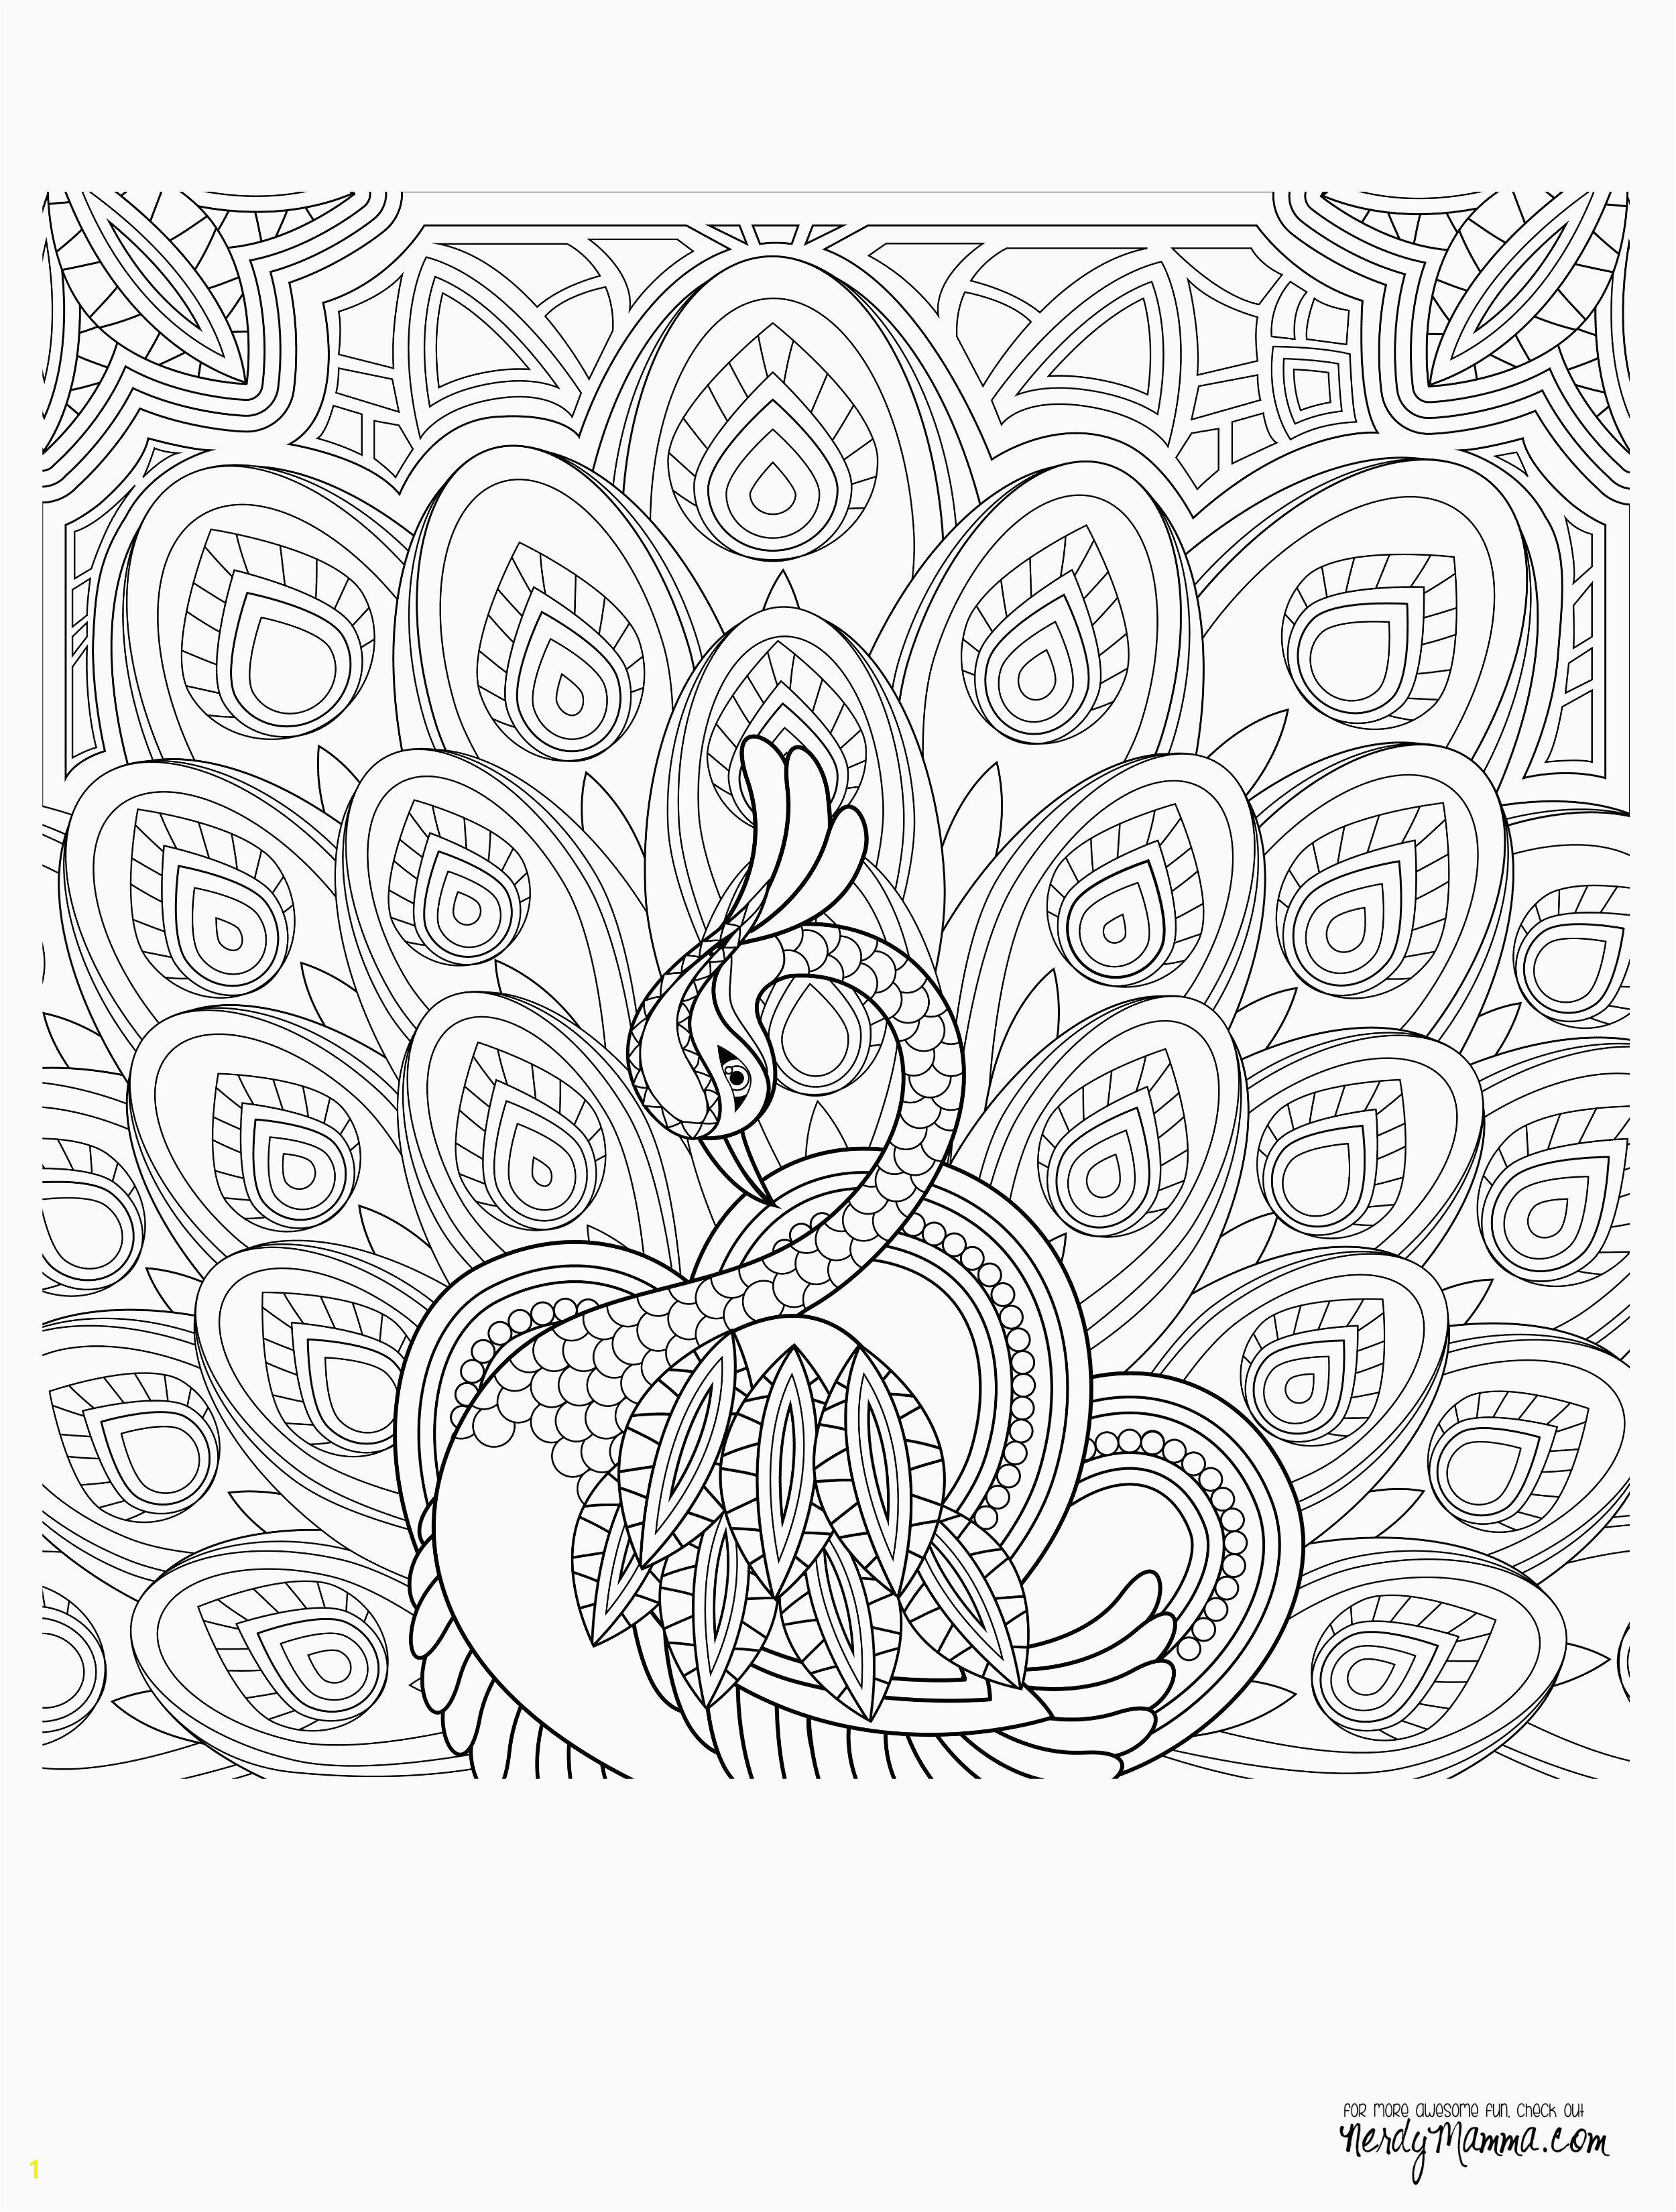 Coloring Pages for Adults Free Printable Free Printable Nature Coloring Pages Beautiful Awesome Coloring Page